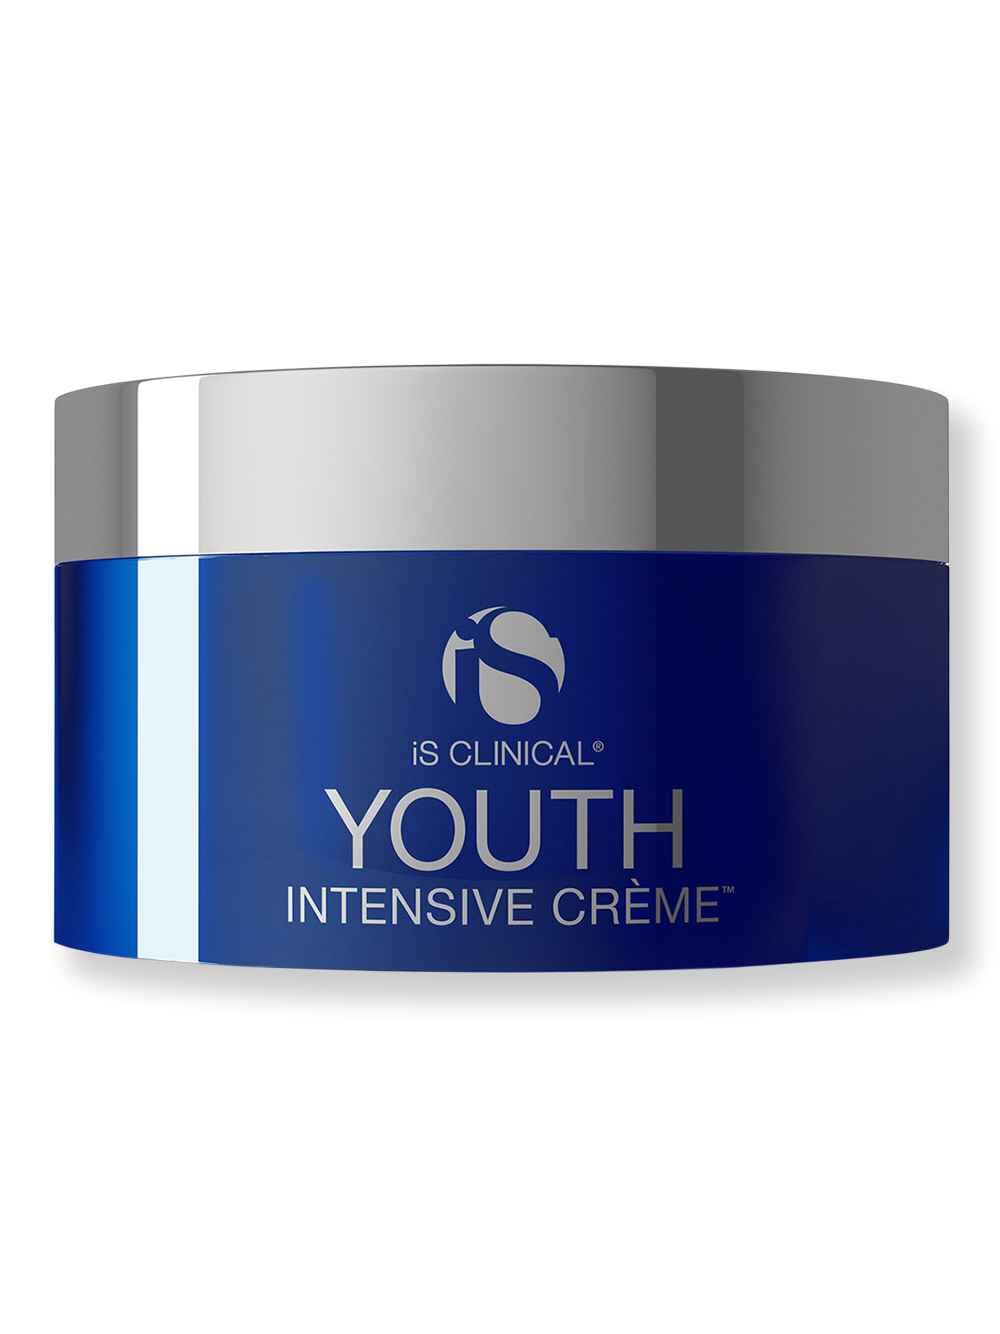 iS Clinical iS Clinical Youth Intensive Creme 1.7 oz50 g Face Moisturizers 